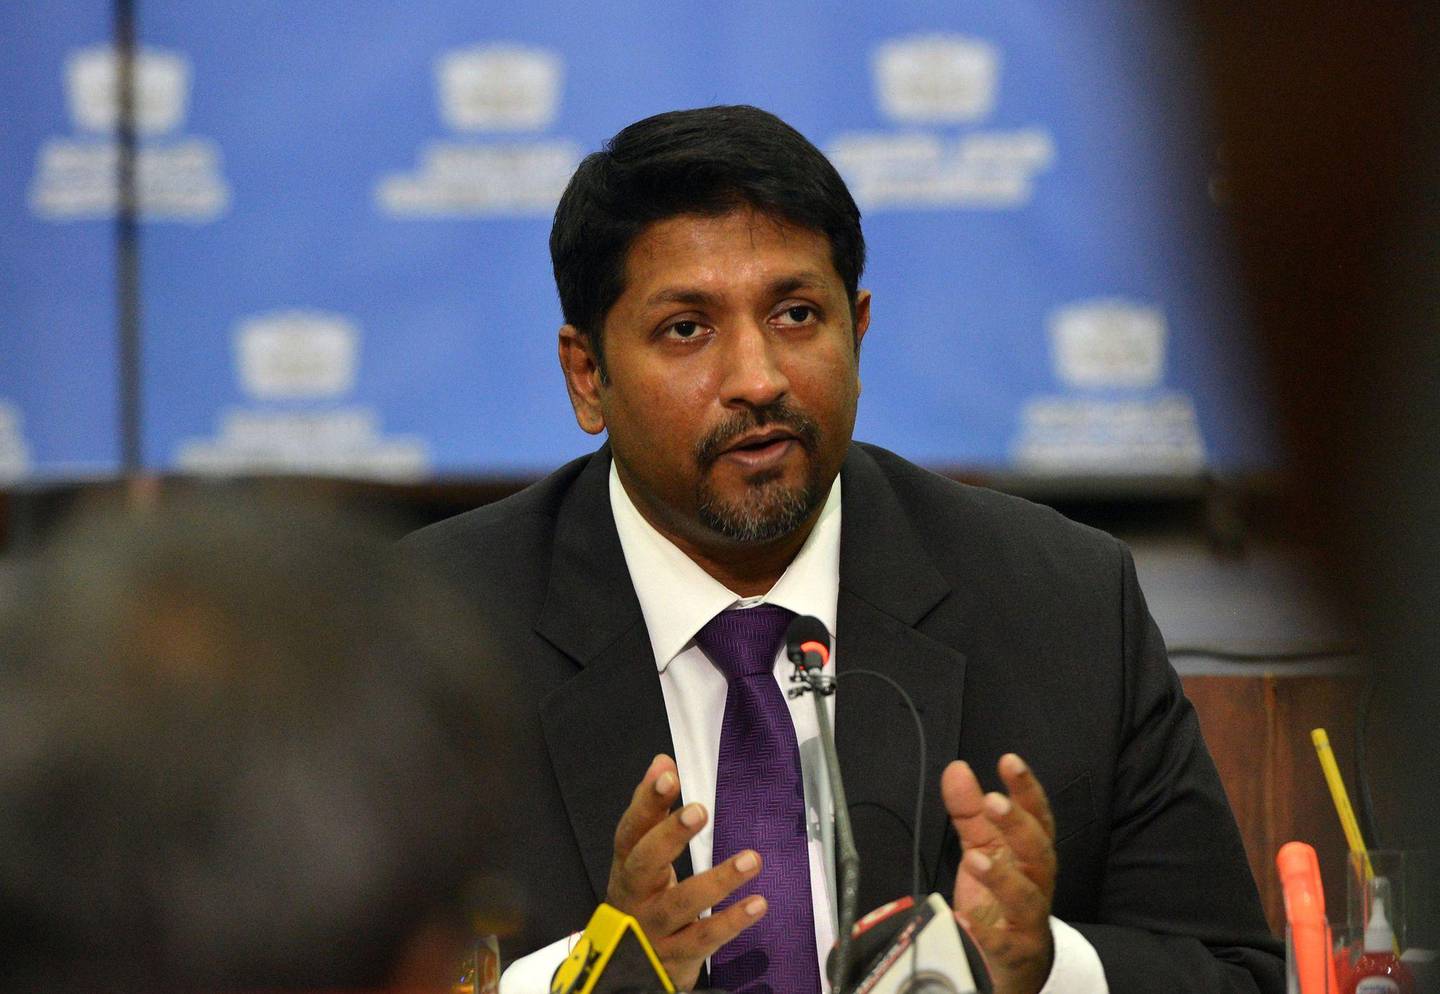 Sri Lanka's state minister of defence Ruwan Wijewardene (L) takes part in a press conference in Colombo on April 24, 2019. - A Sri Lankan security dragnet hunting those responsible for horrifying bombings that claimed more than 350 lives has scooped up a further 18 suspects, police said April 24, as pressure mounted on politicians to explain why no one acted on intelligence warnings. (Photo by ISHARA S. KODIKARA / AFP)